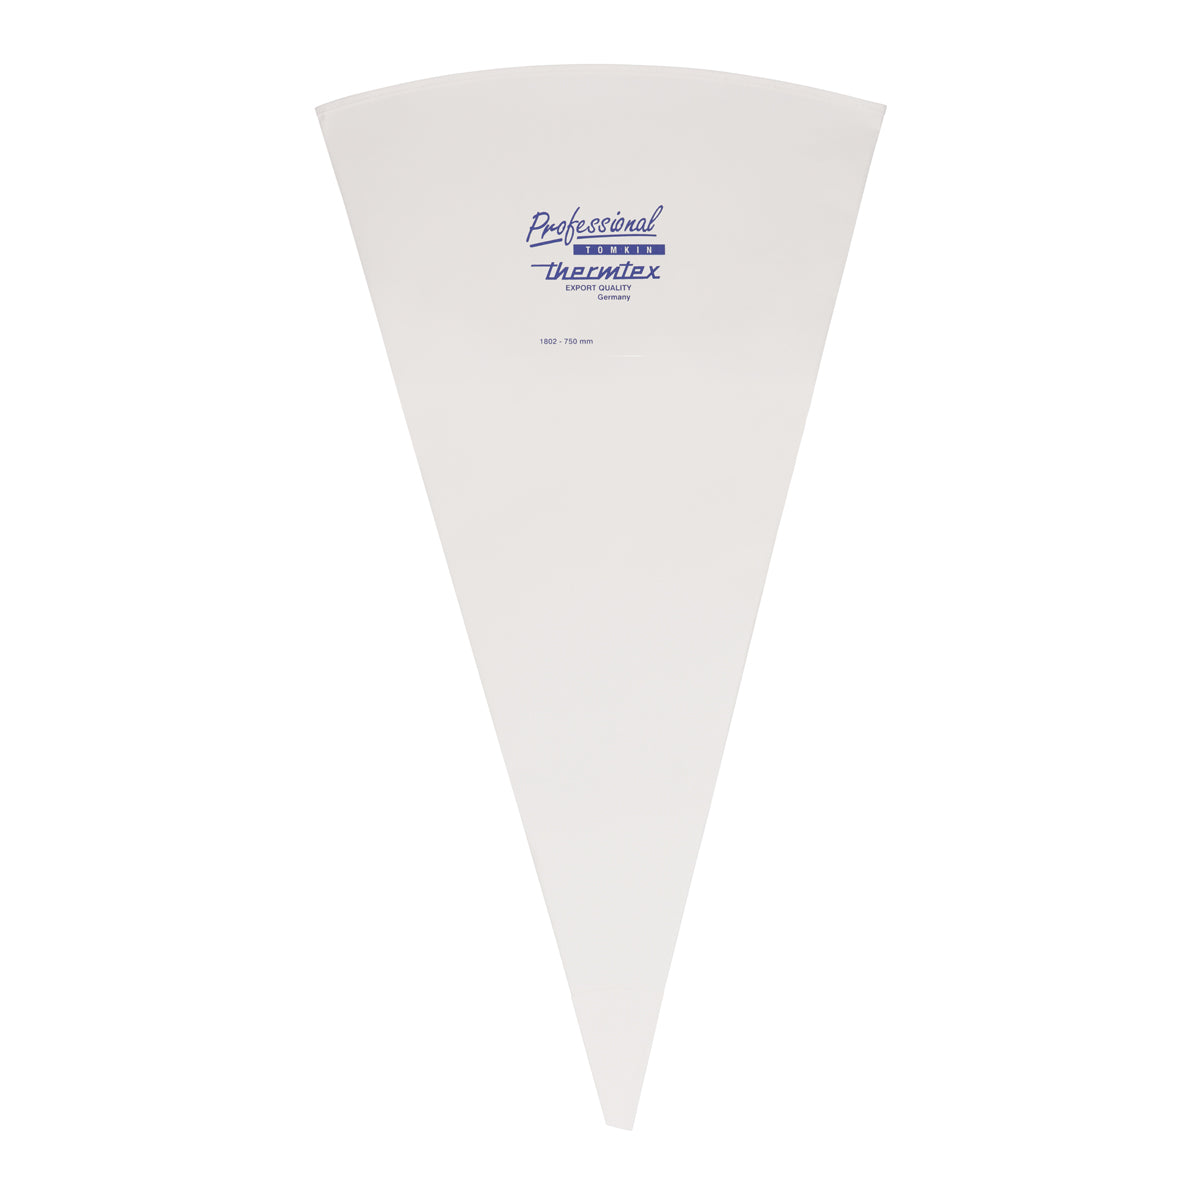 01802 Thermohauser Export Pastry Bag 750mm Tomkin Australia Hospitality Supplies